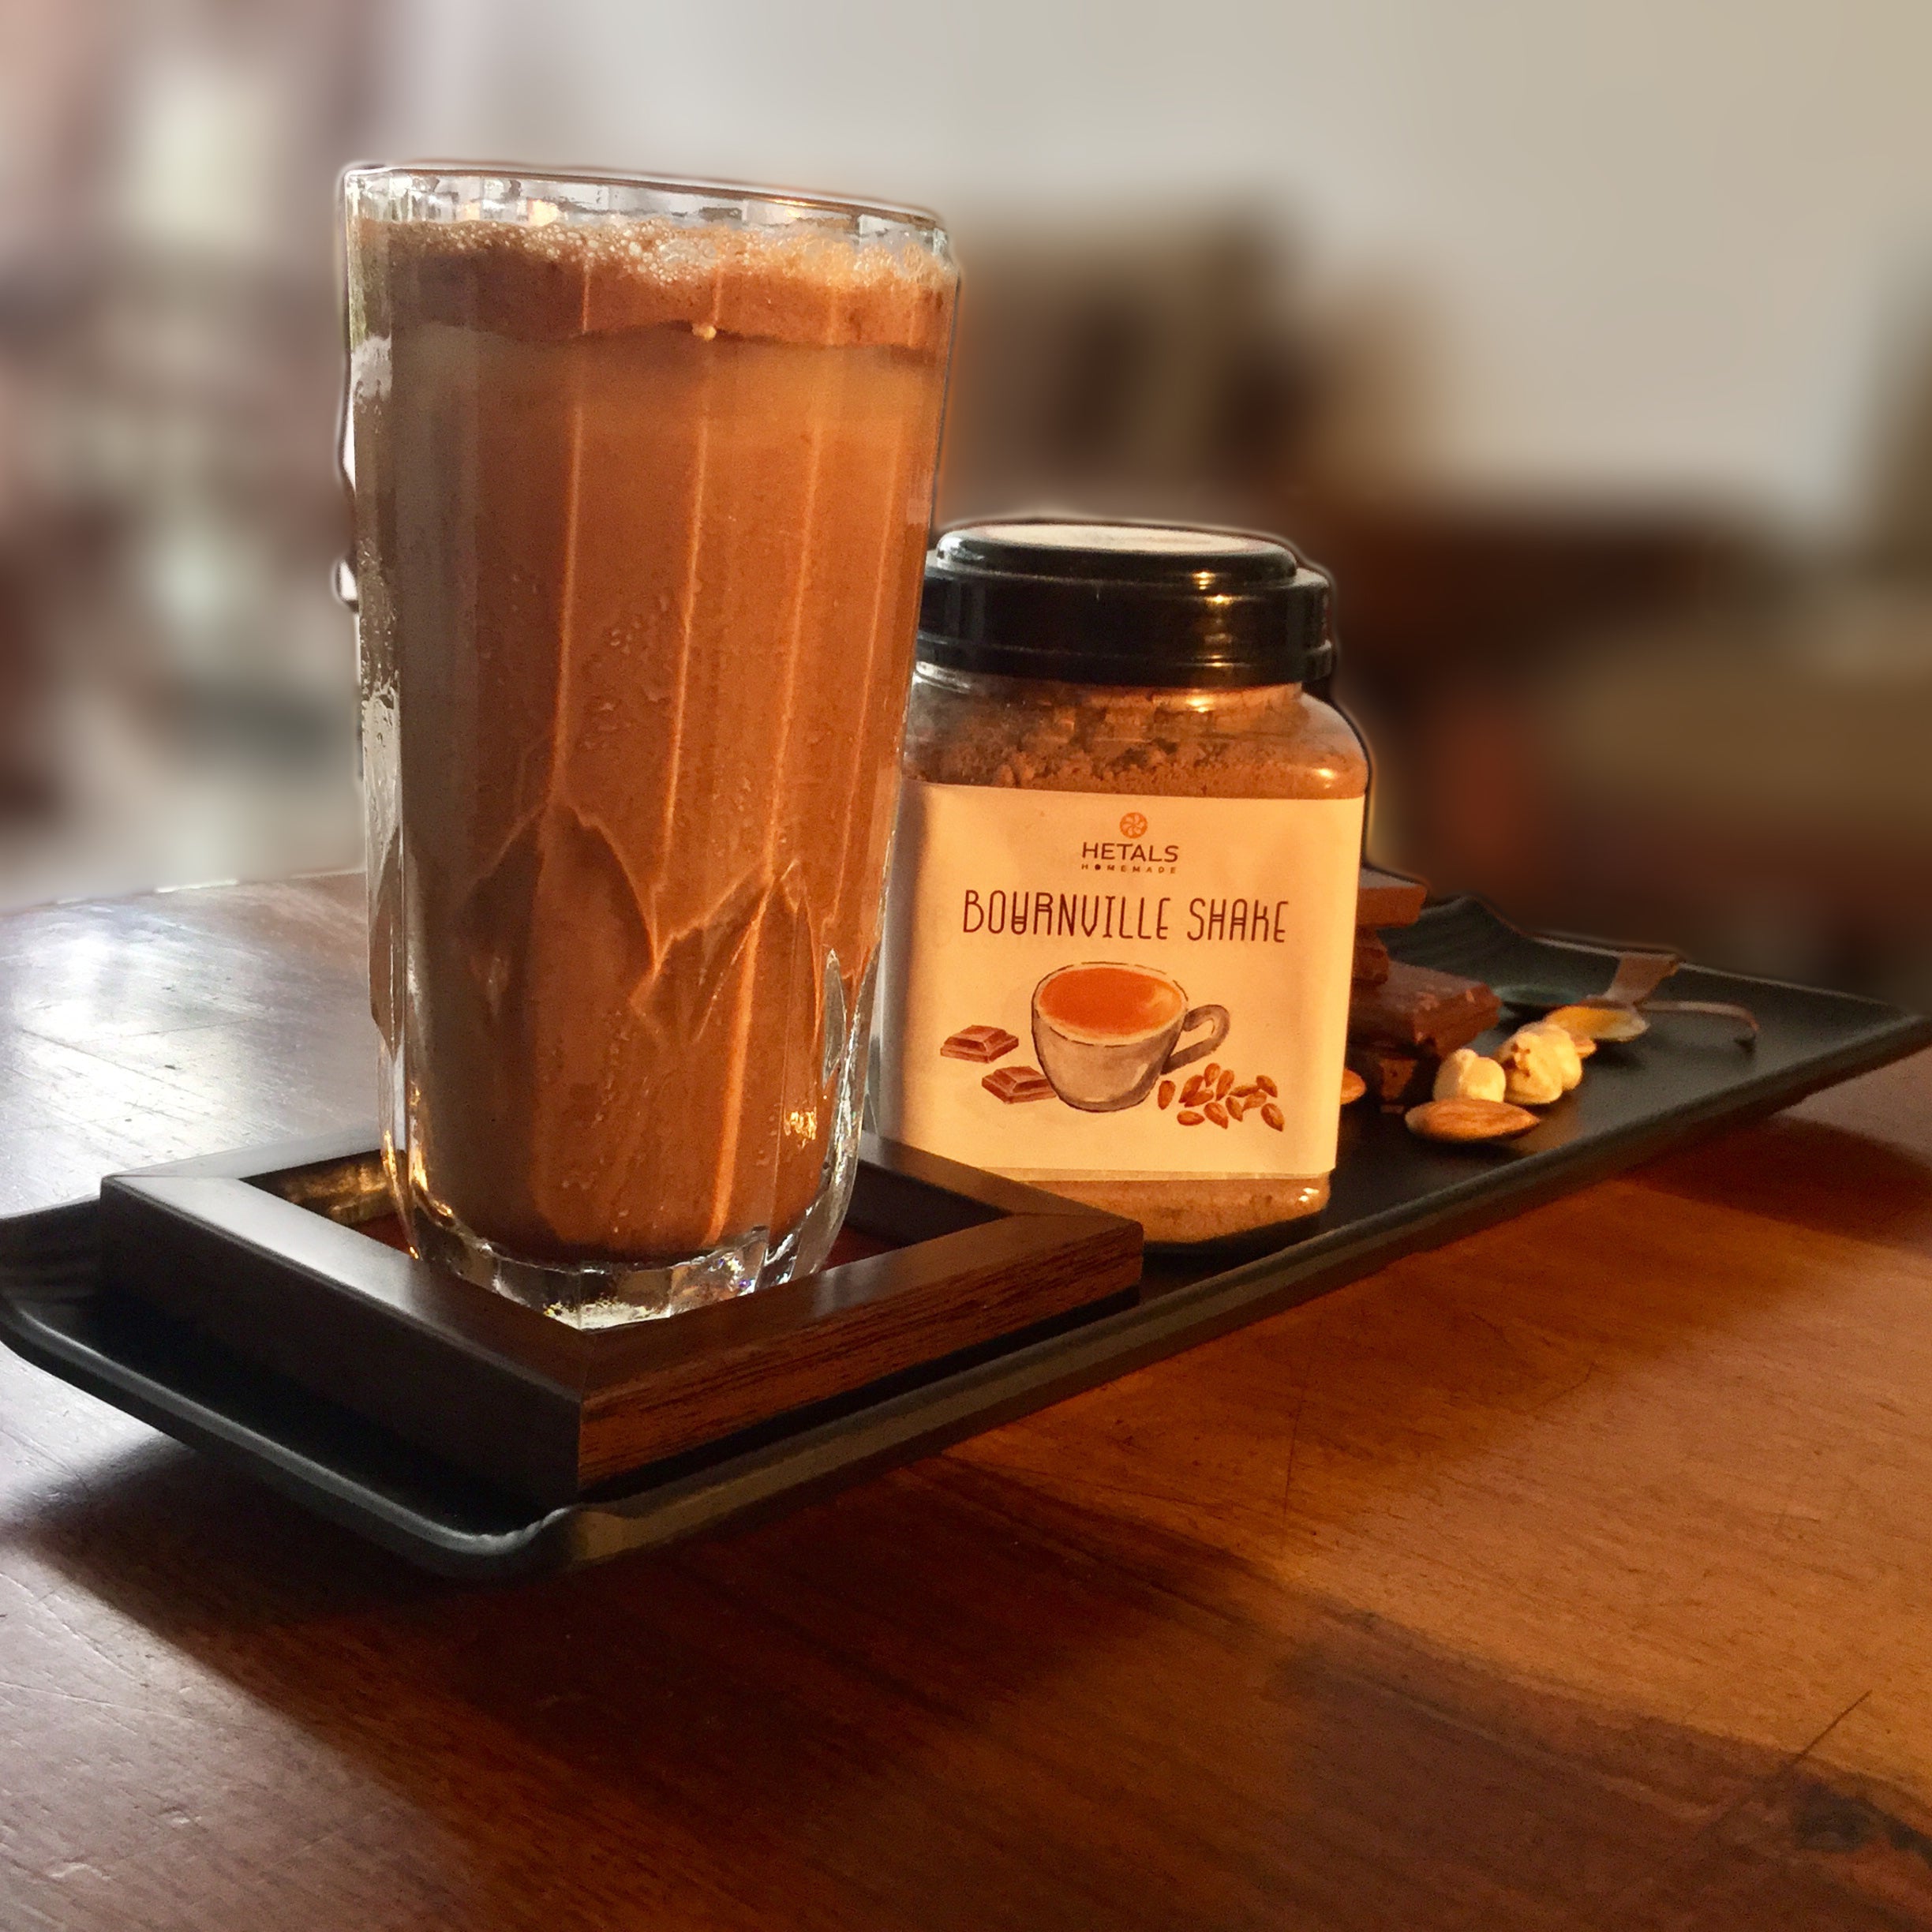 Our Chocolate Bournville Shake Flavoured Instant Shake is best served with hot or cold milk.